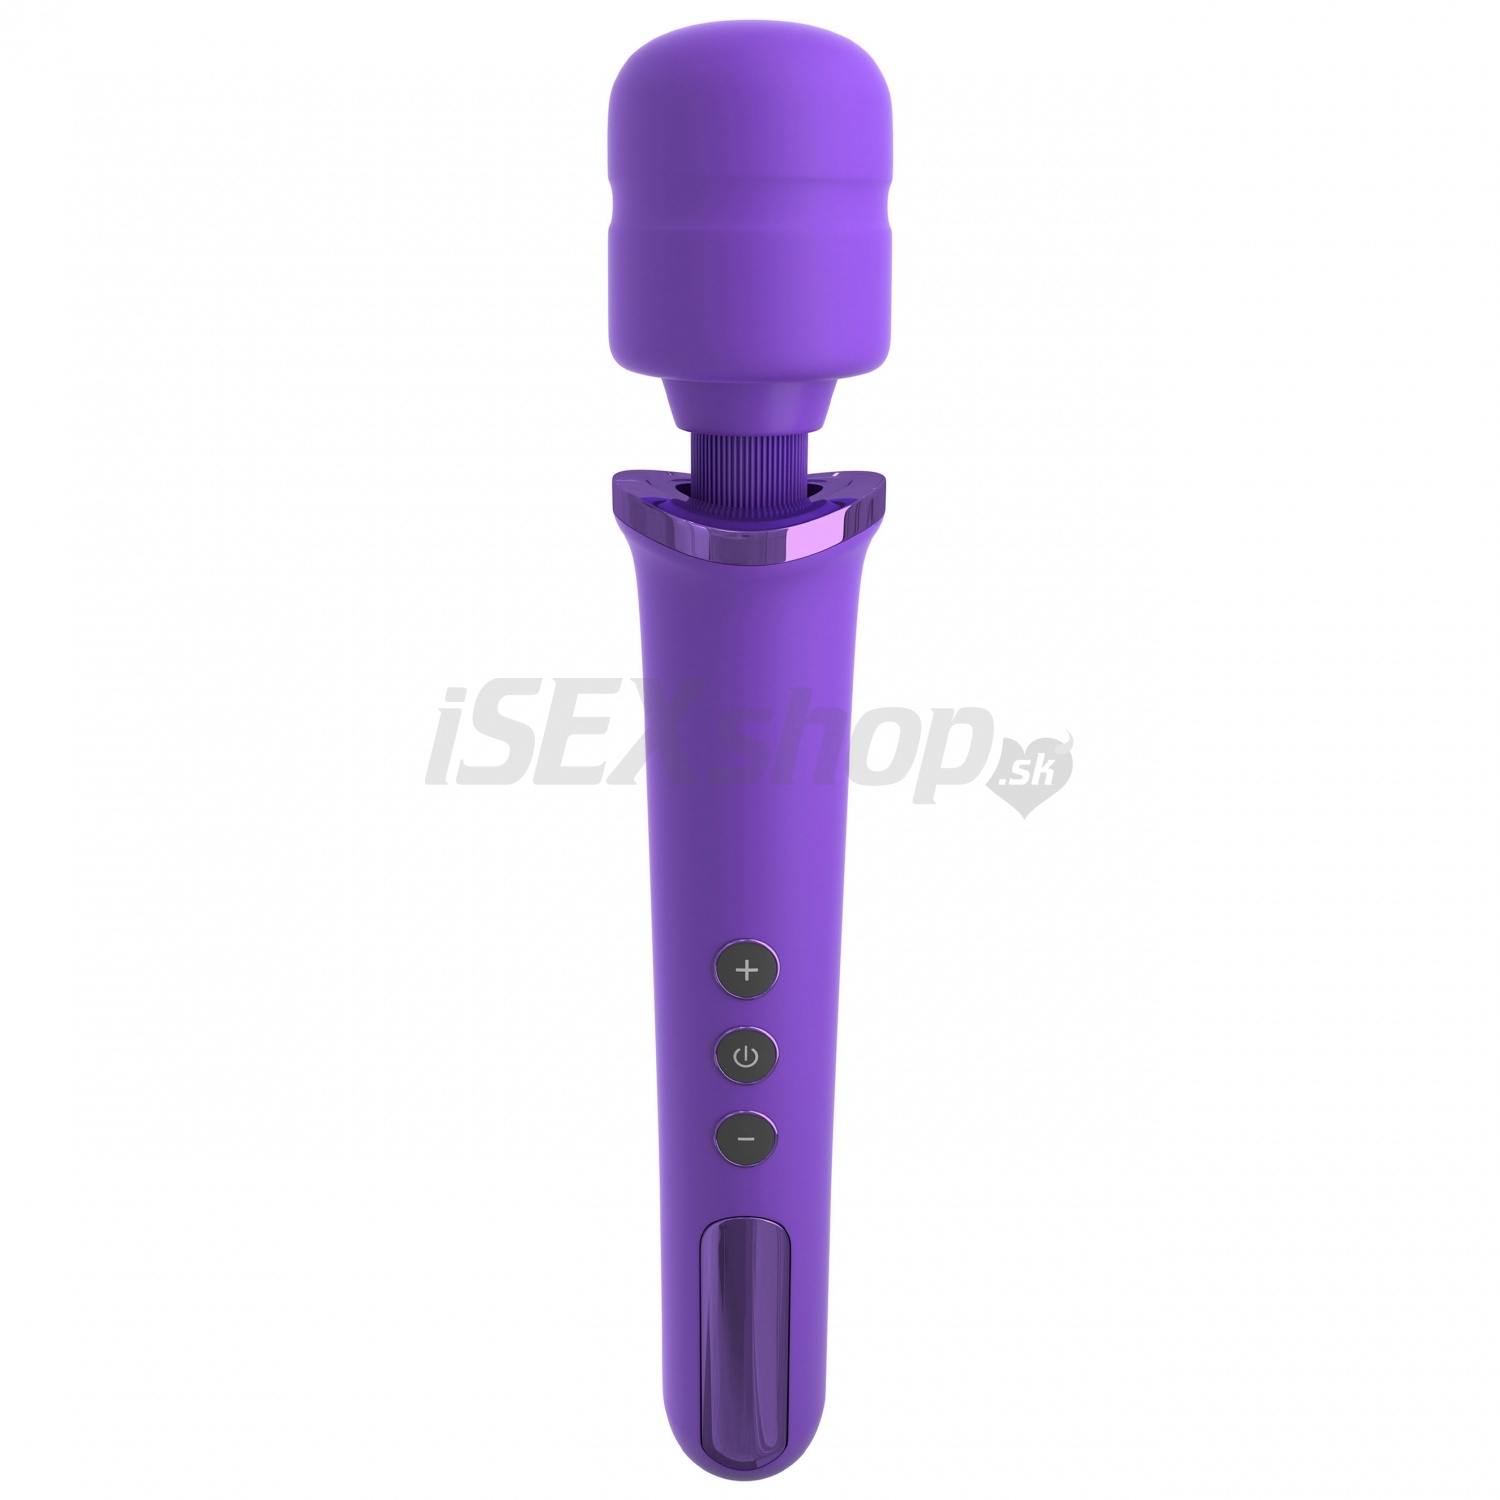 E-shop Her Rechargeable Power Wand